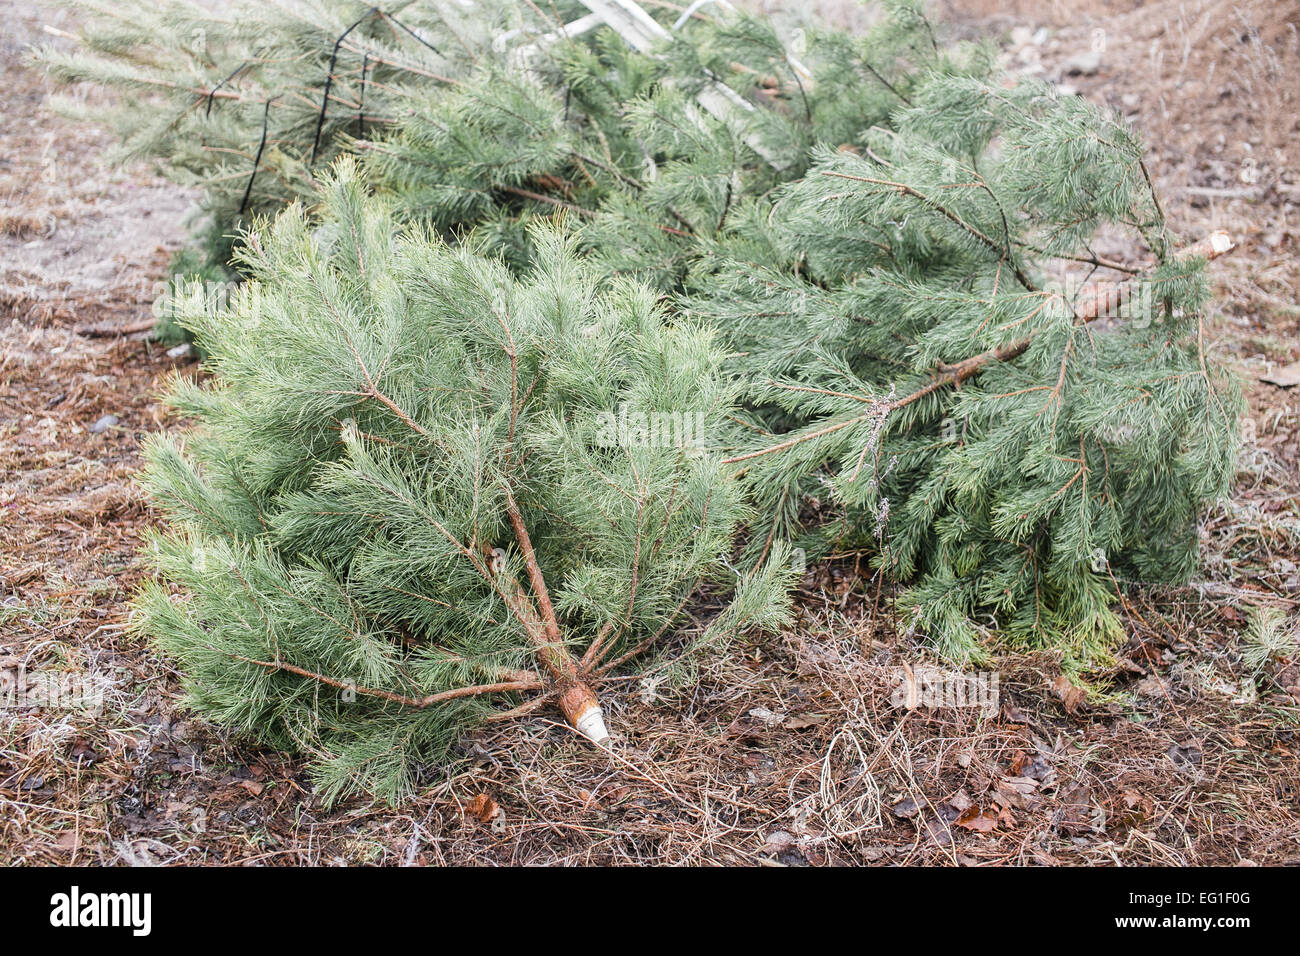 Pine trees on the ground after Christmas Stock Photo